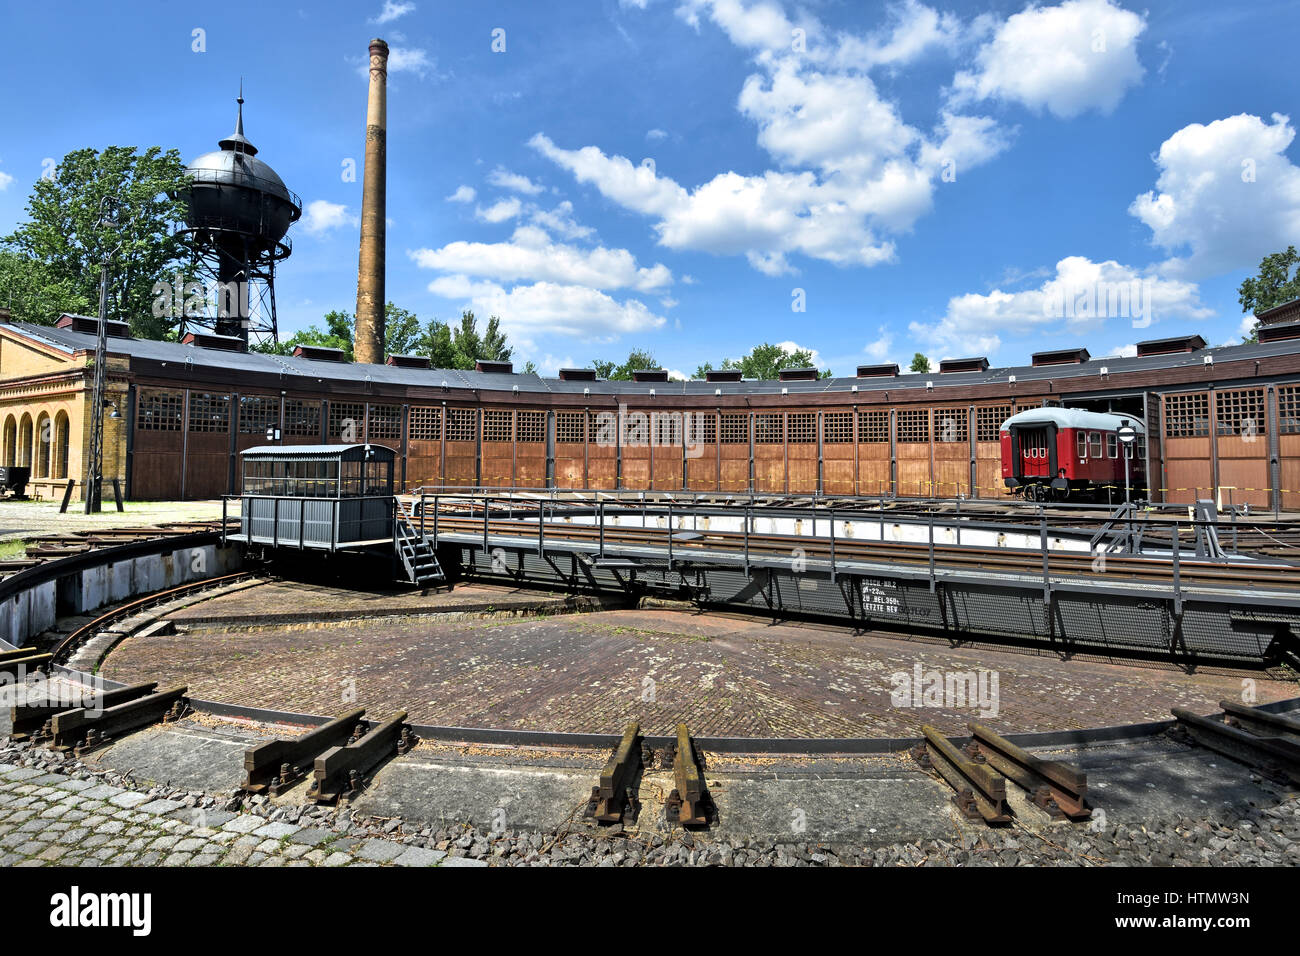 Museum of Technology (The Deutsches Technikmuseum, scientific and technical collection. ) Germany  Berlin Kreuzberg Stock Photo